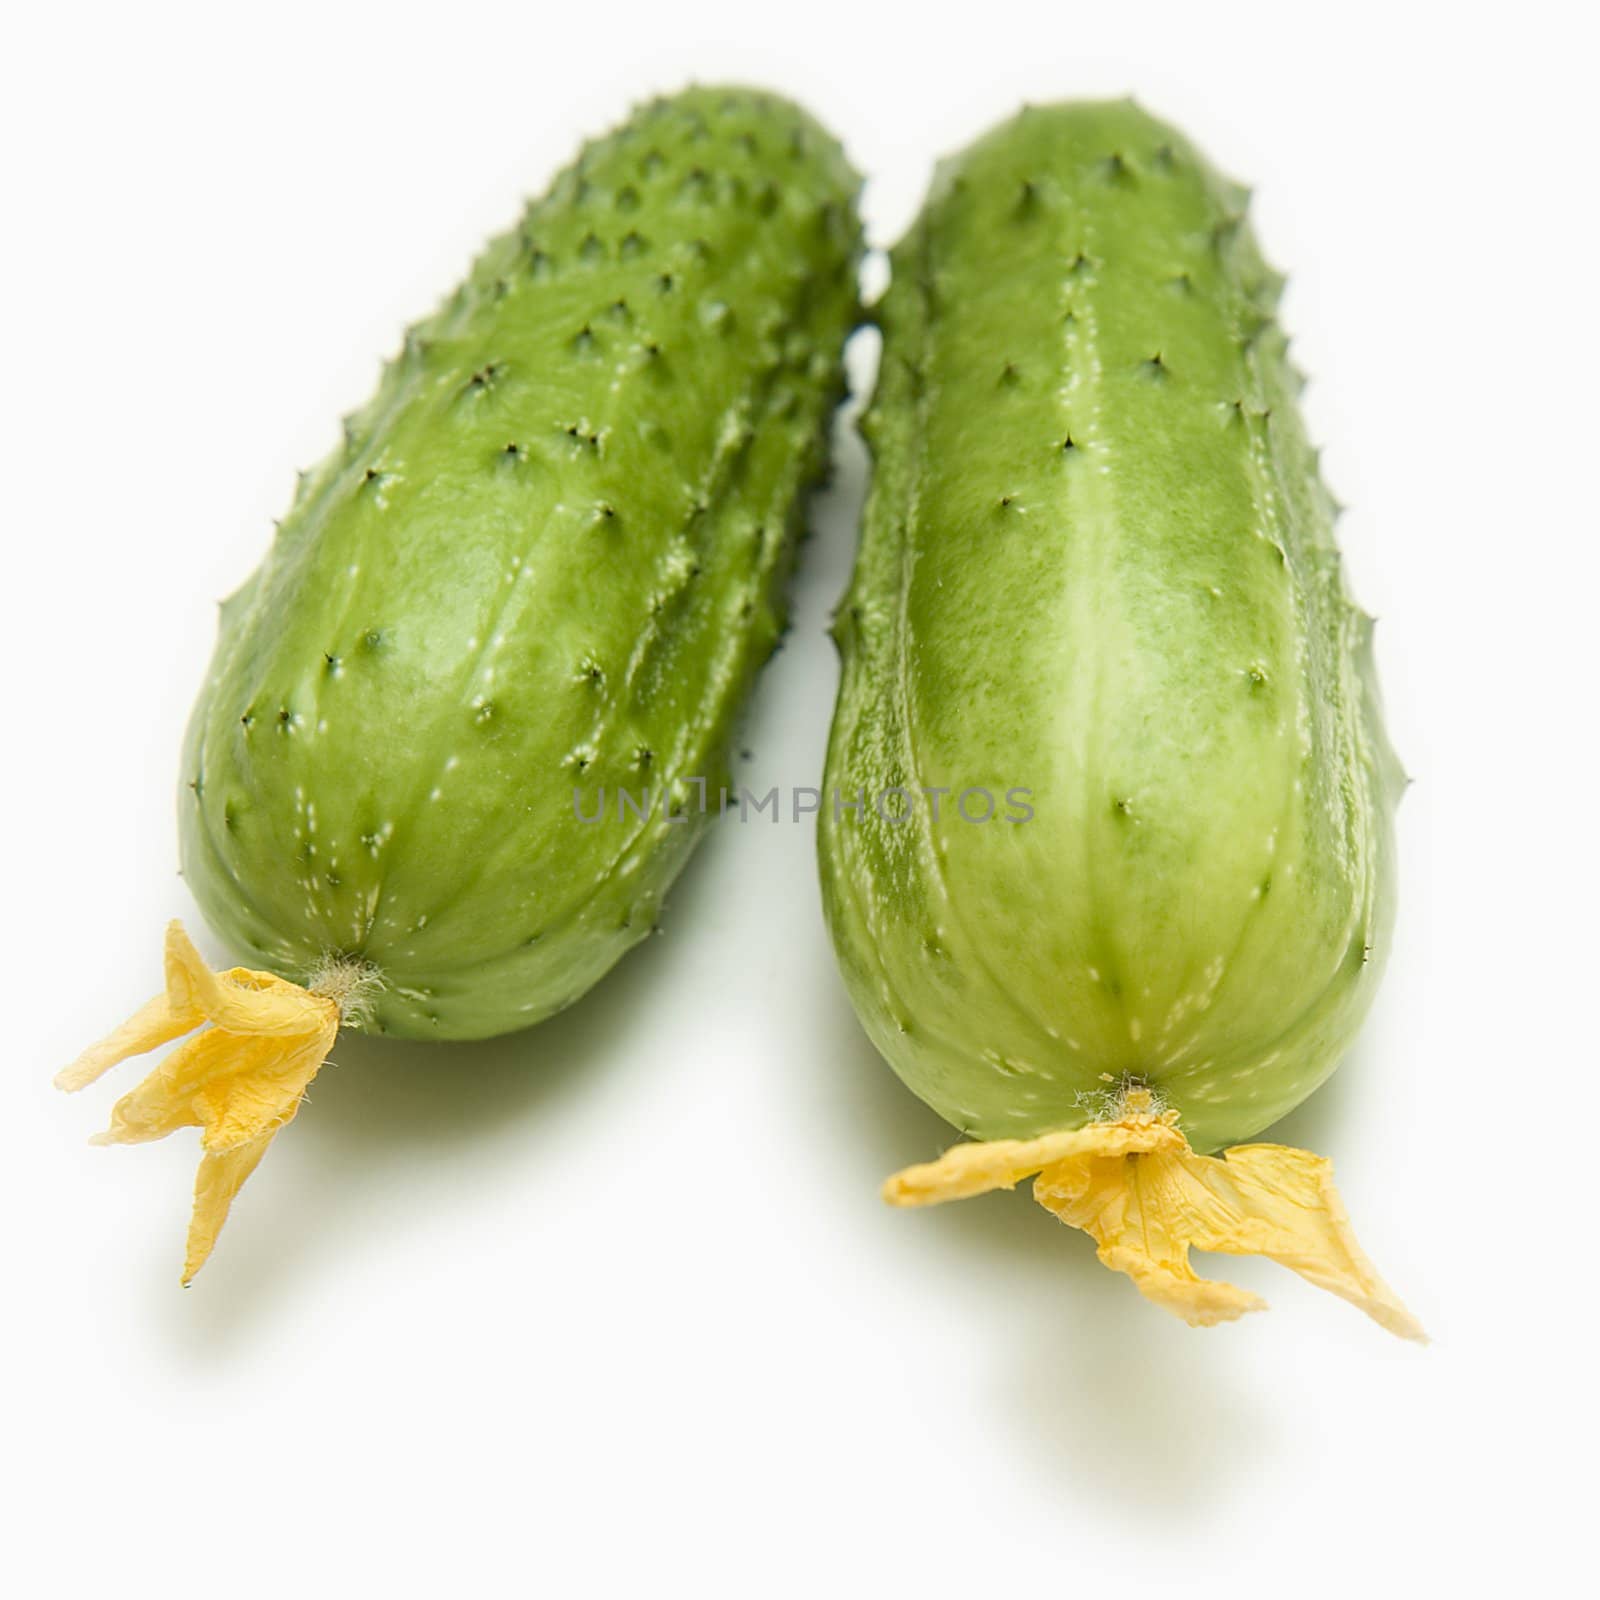 Two fresh cucumbers on a white background